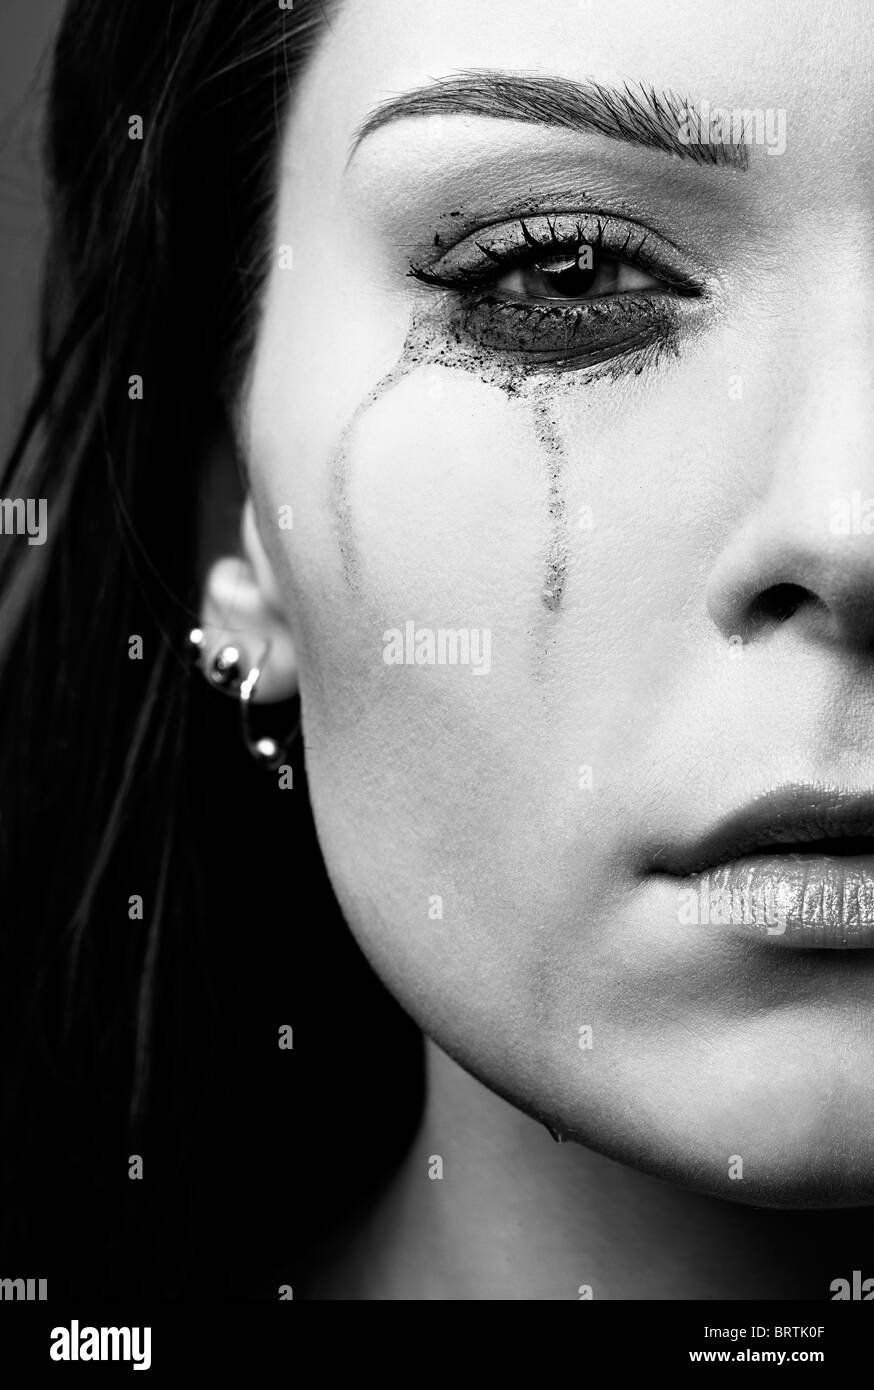 close-up portrait of beautiful crying girl with smeared mascara Stock Photo